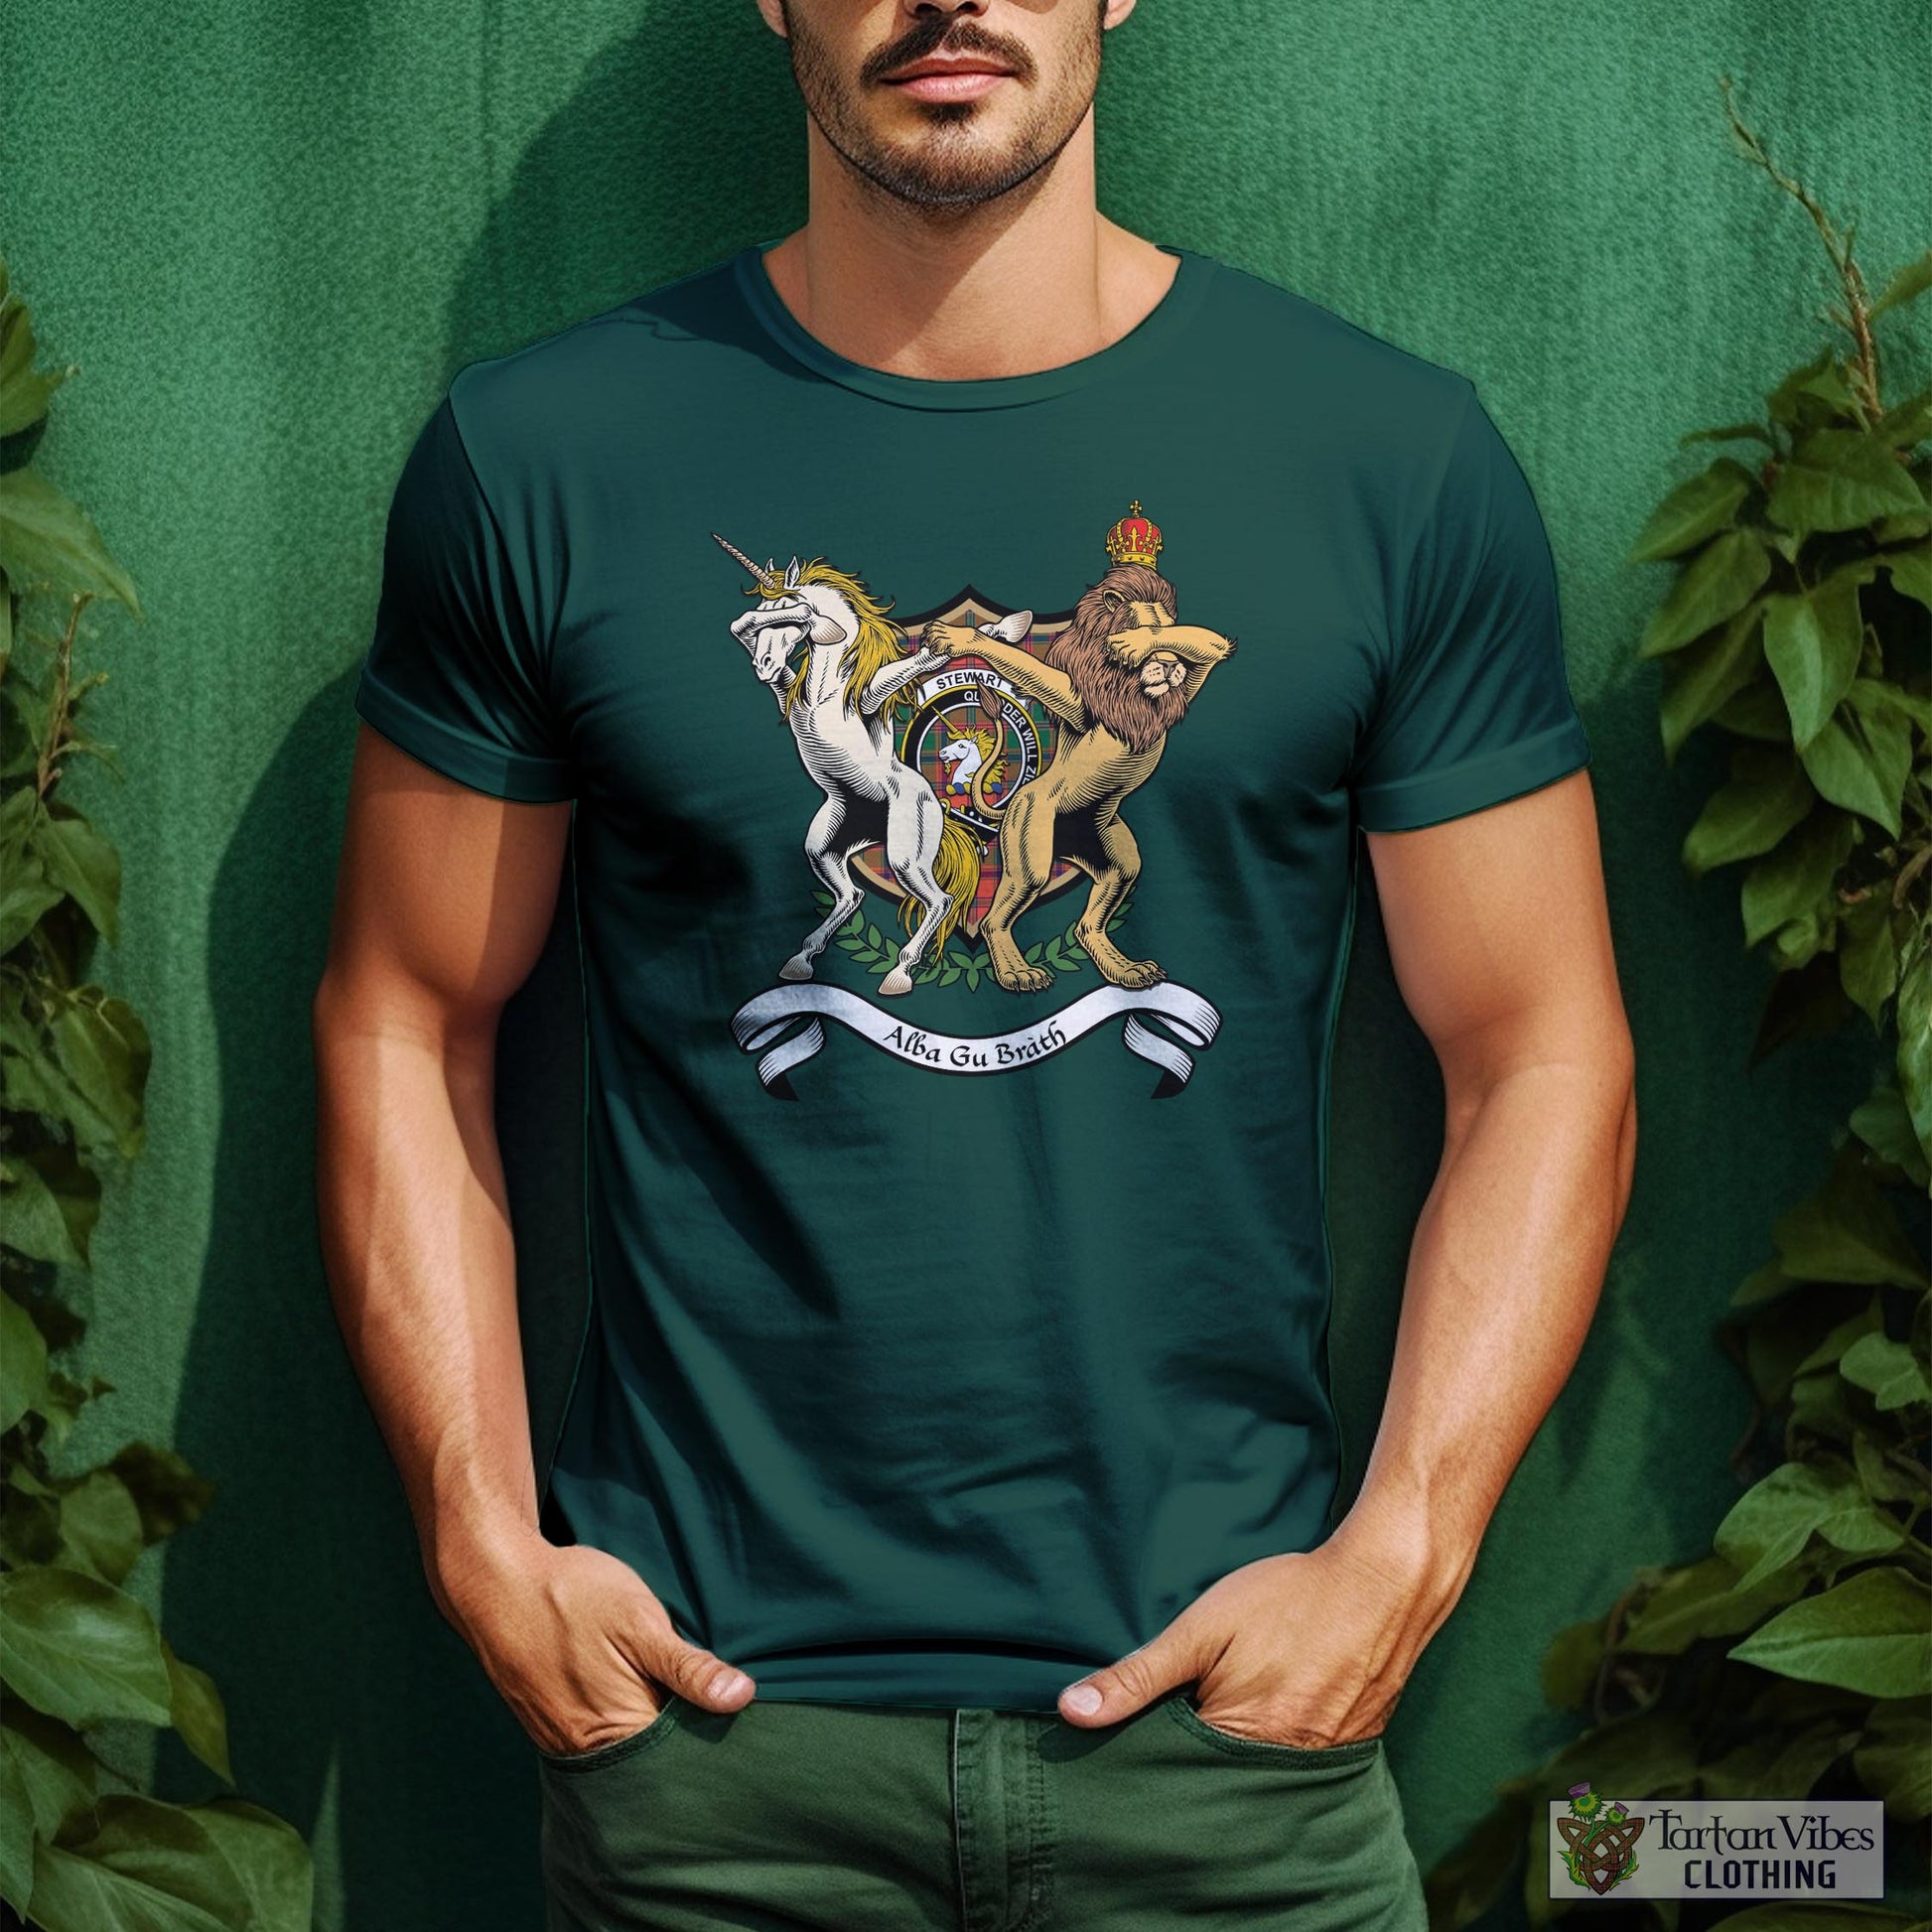 Tartan Vibes Clothing Stewart of Appin Ancient Family Crest Cotton Men's T-Shirt with Scotland Royal Coat Of Arm Funny Style